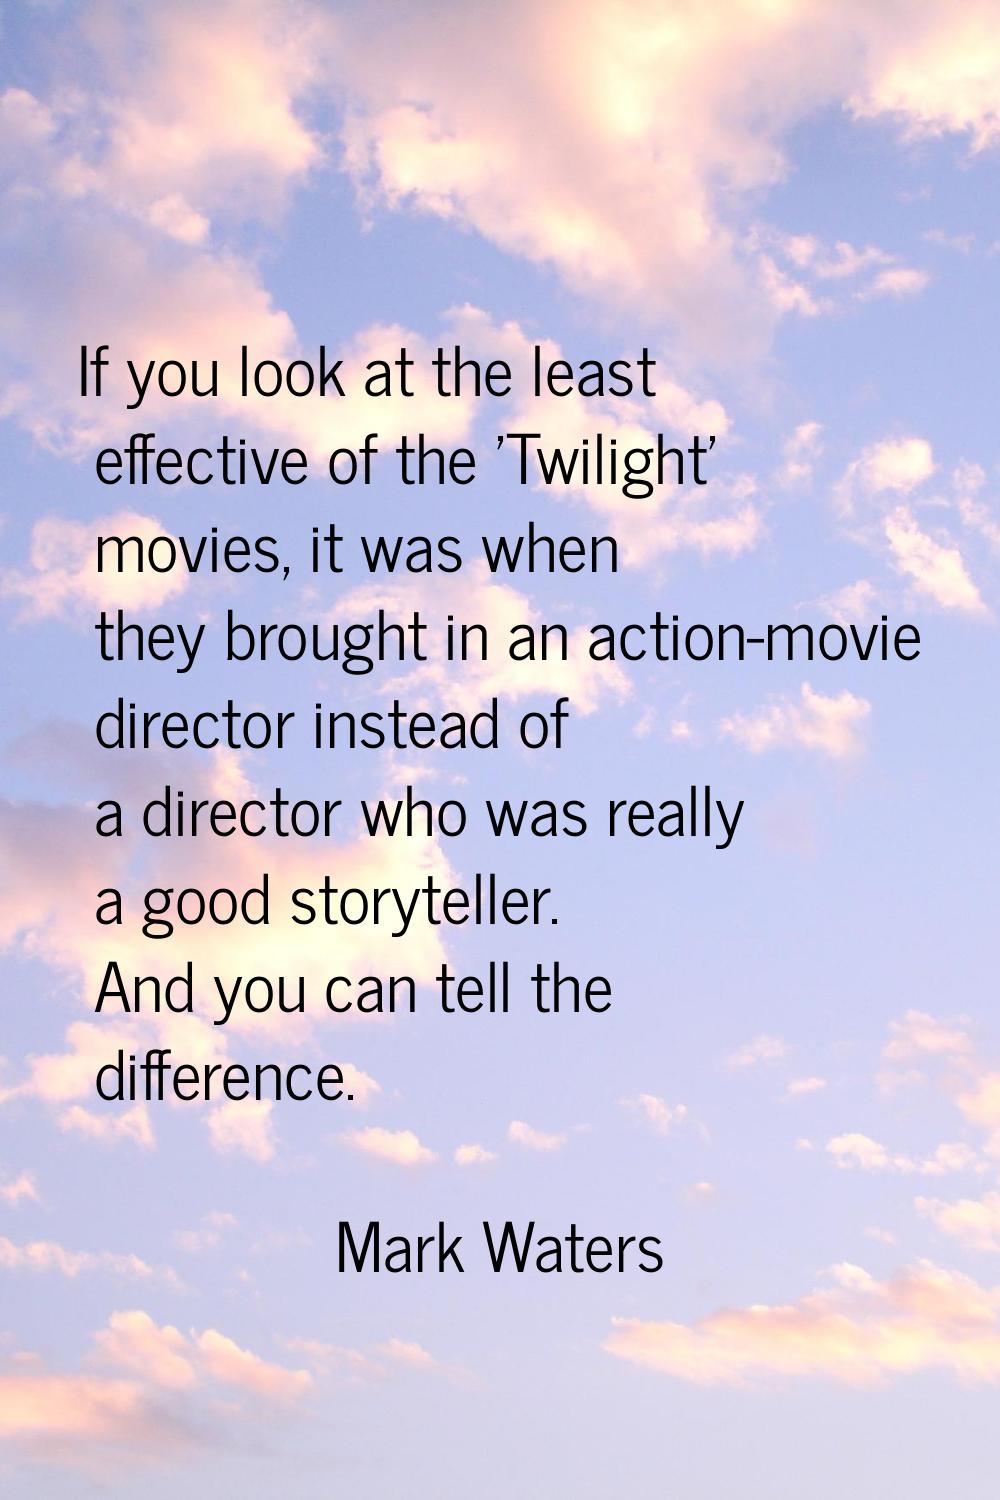 If you look at the least effective of the 'Twilight' movies, it was when they brought in an action-